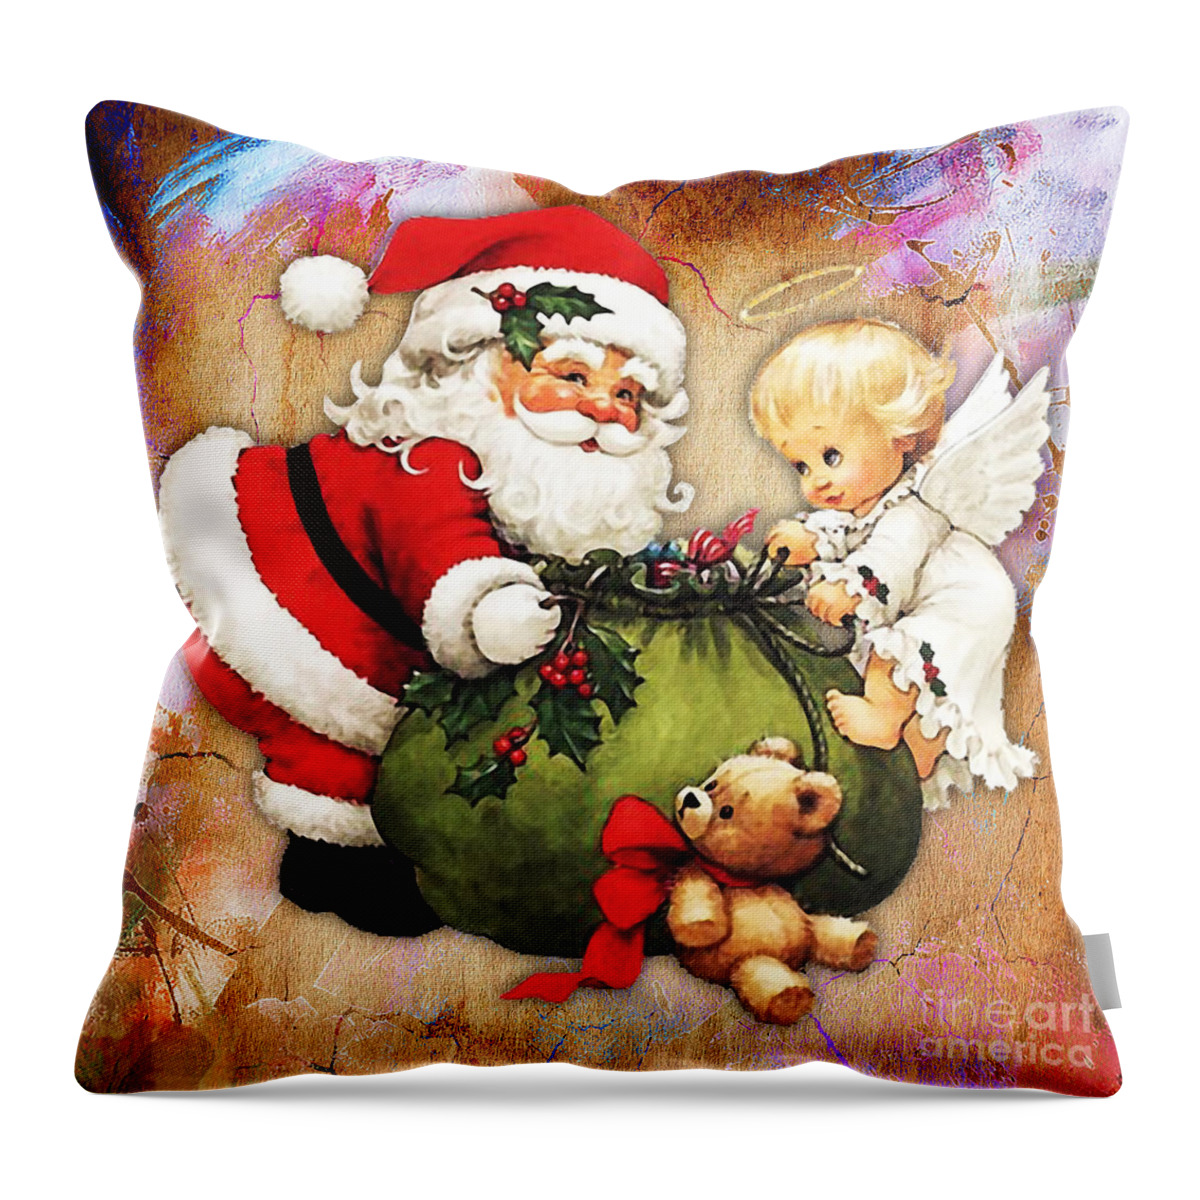 Christmas Throw Pillow featuring the mixed media Merry Christmas by Marvin Blaine